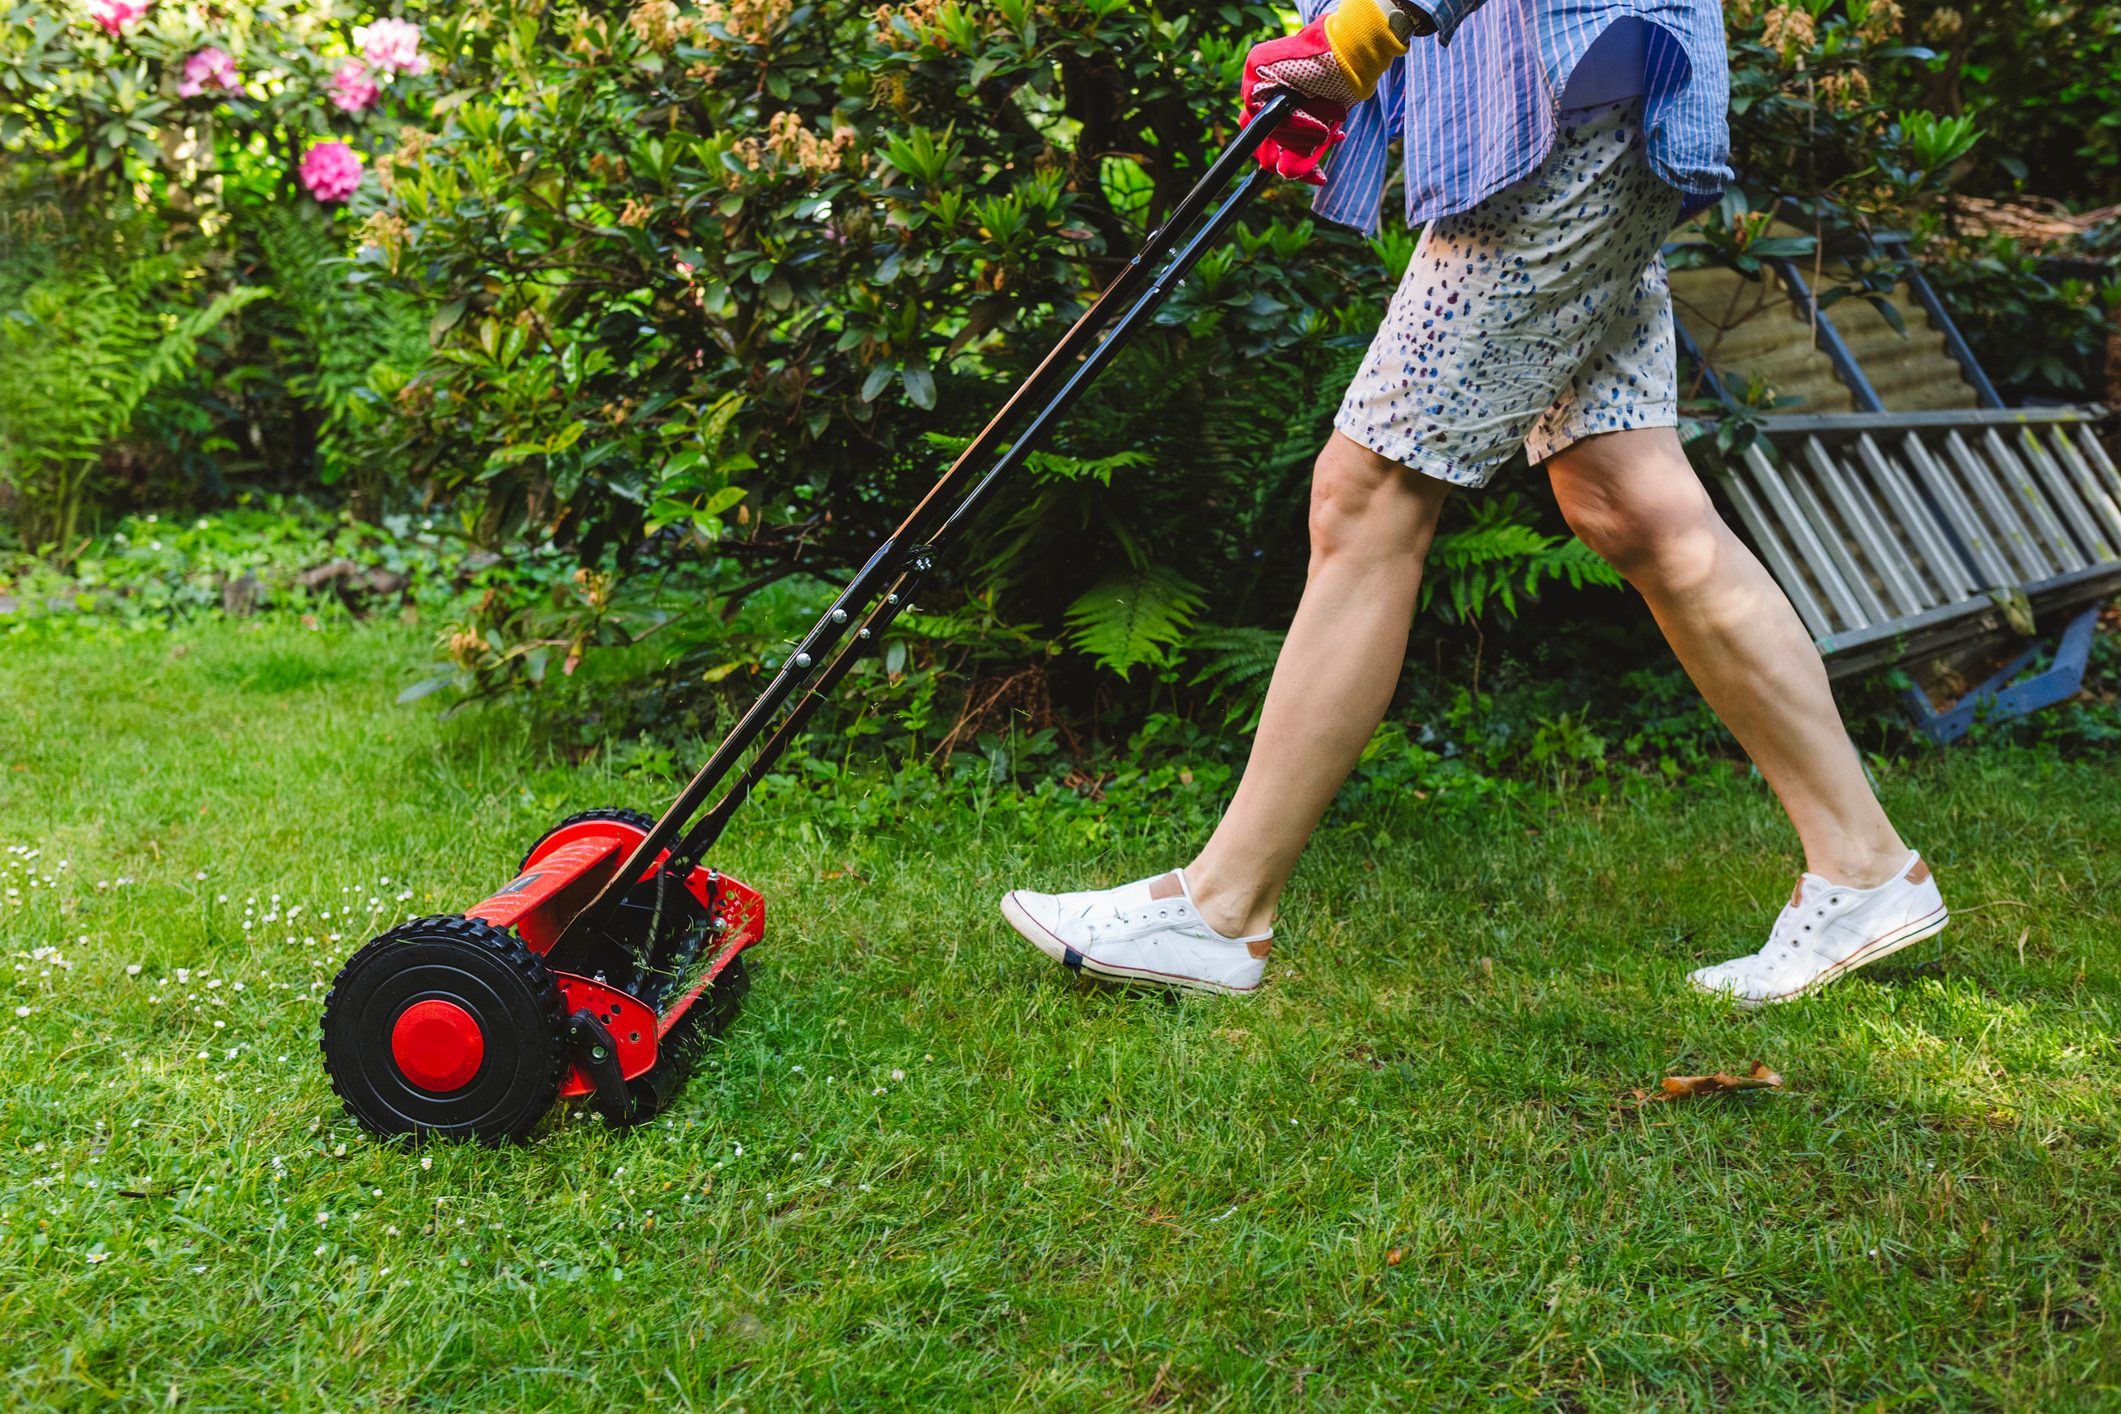 When Should You Start Mowing Your Lawn in the Spring?